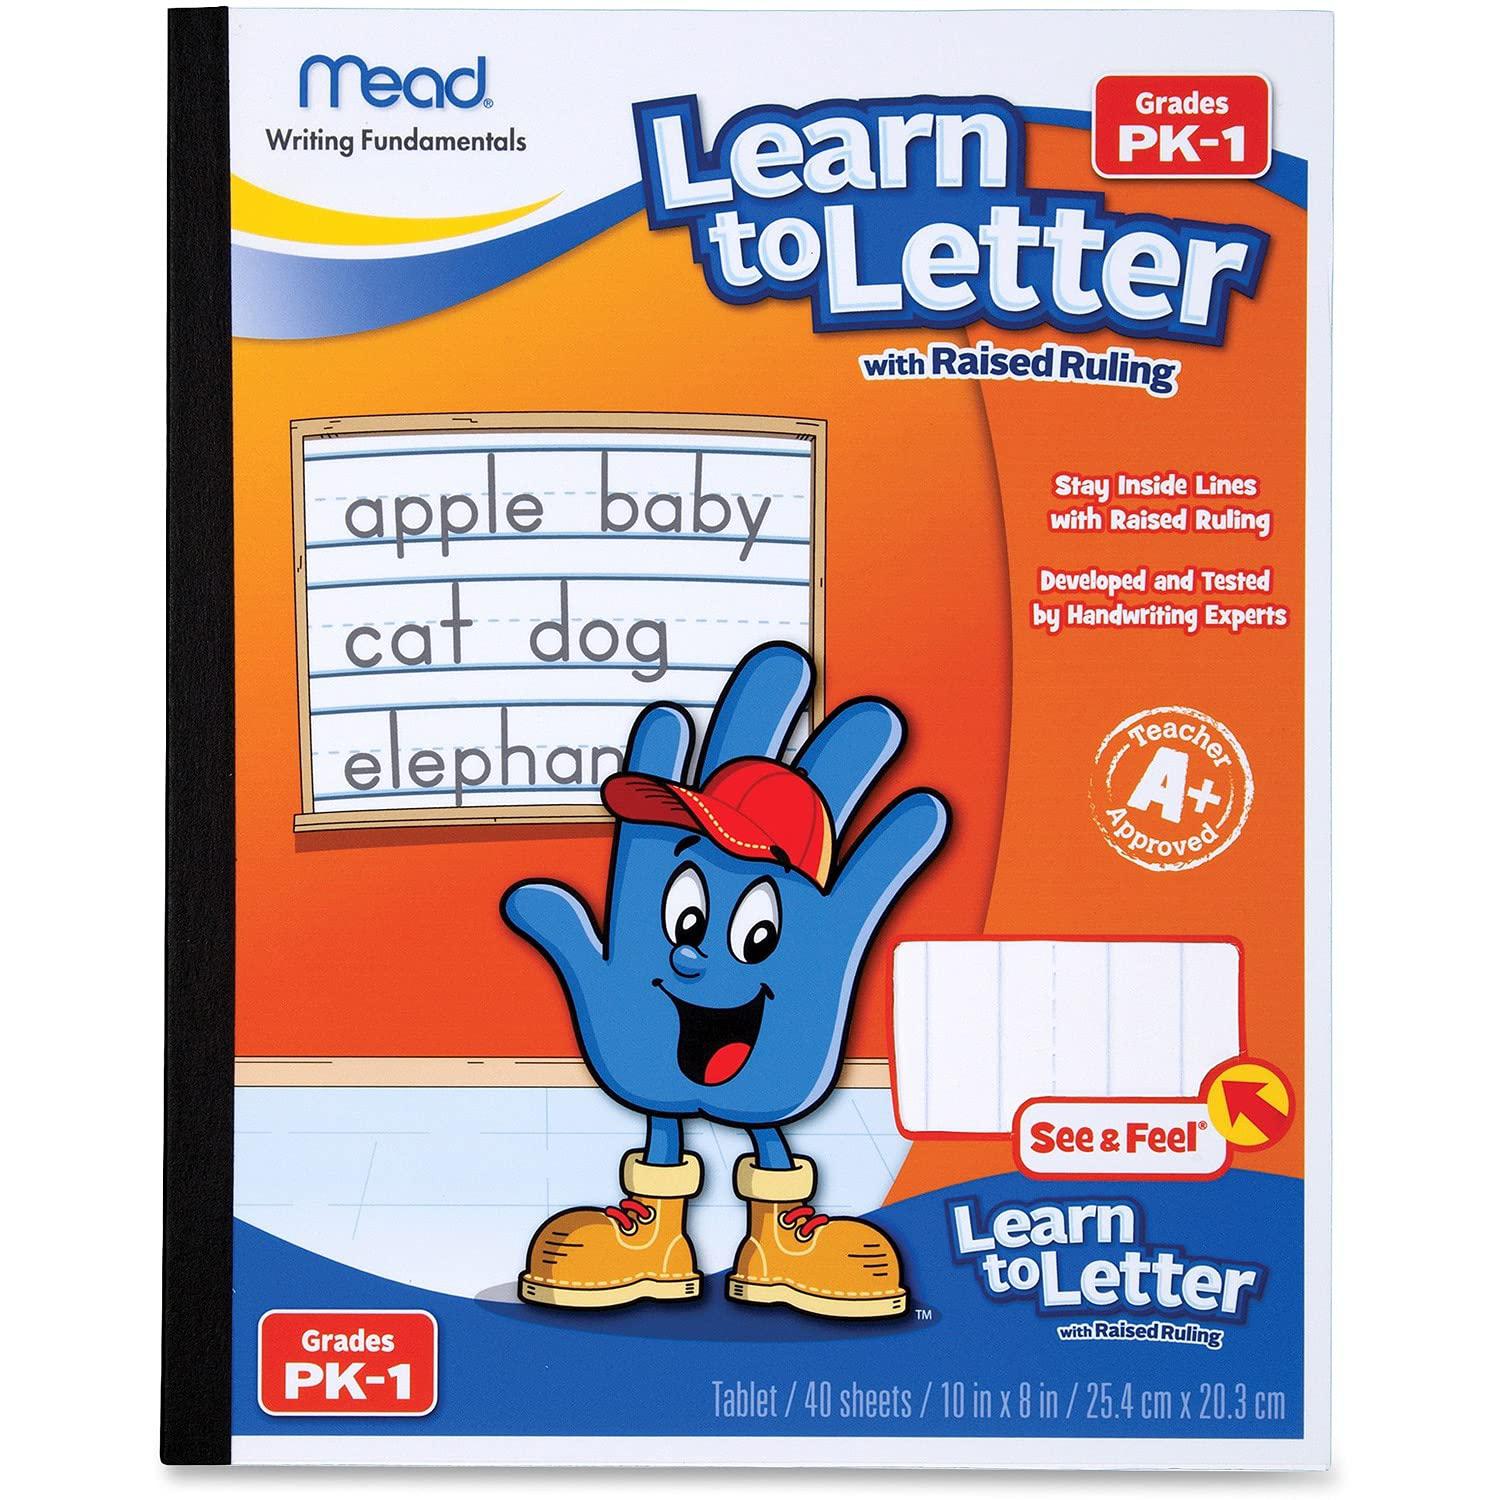 mead see and feel learn to letter raised ruling grades pk-1, 10 x 8 inches, 80 count